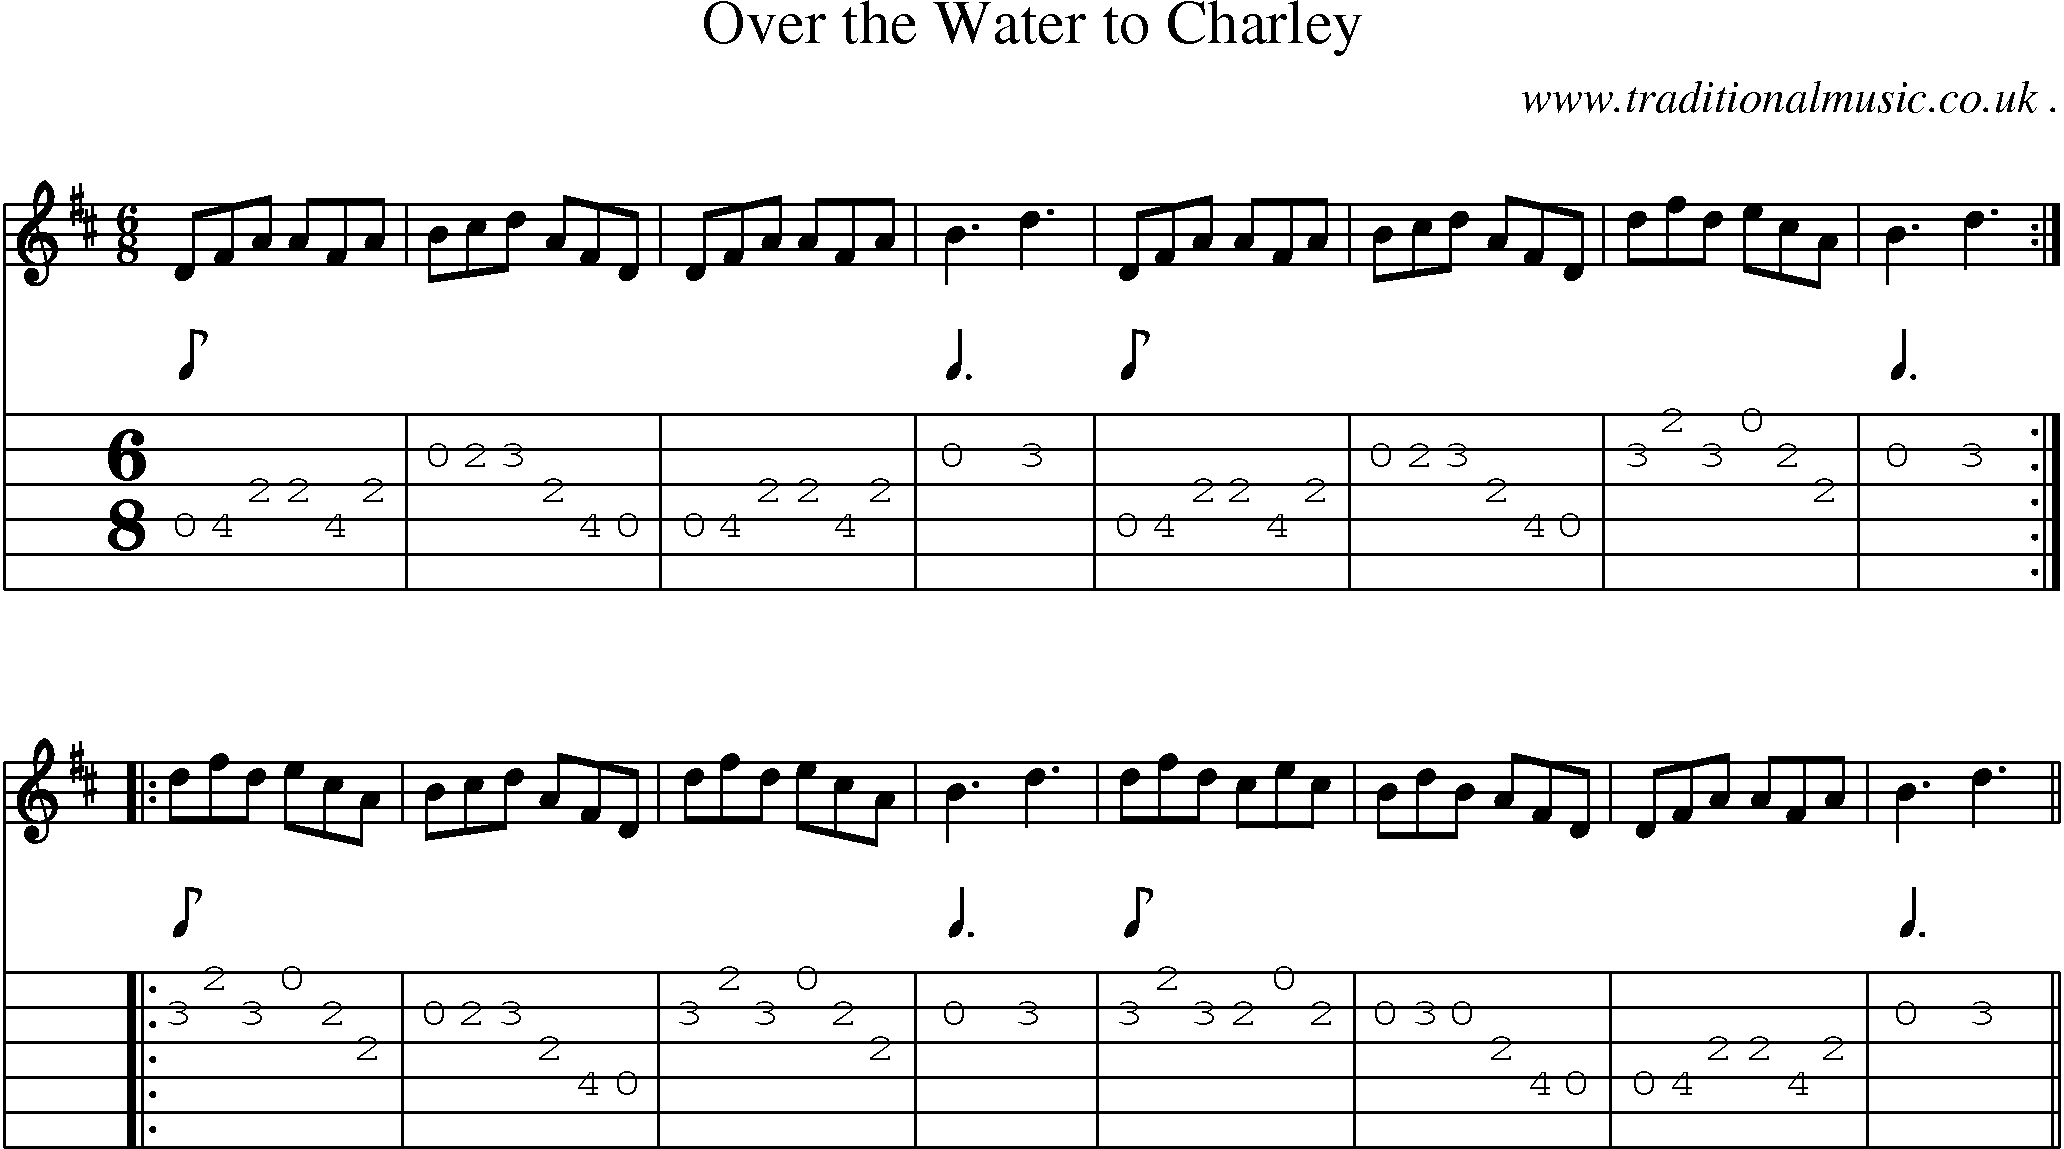 Sheet-Music and Guitar Tabs for Over The Water To Charley